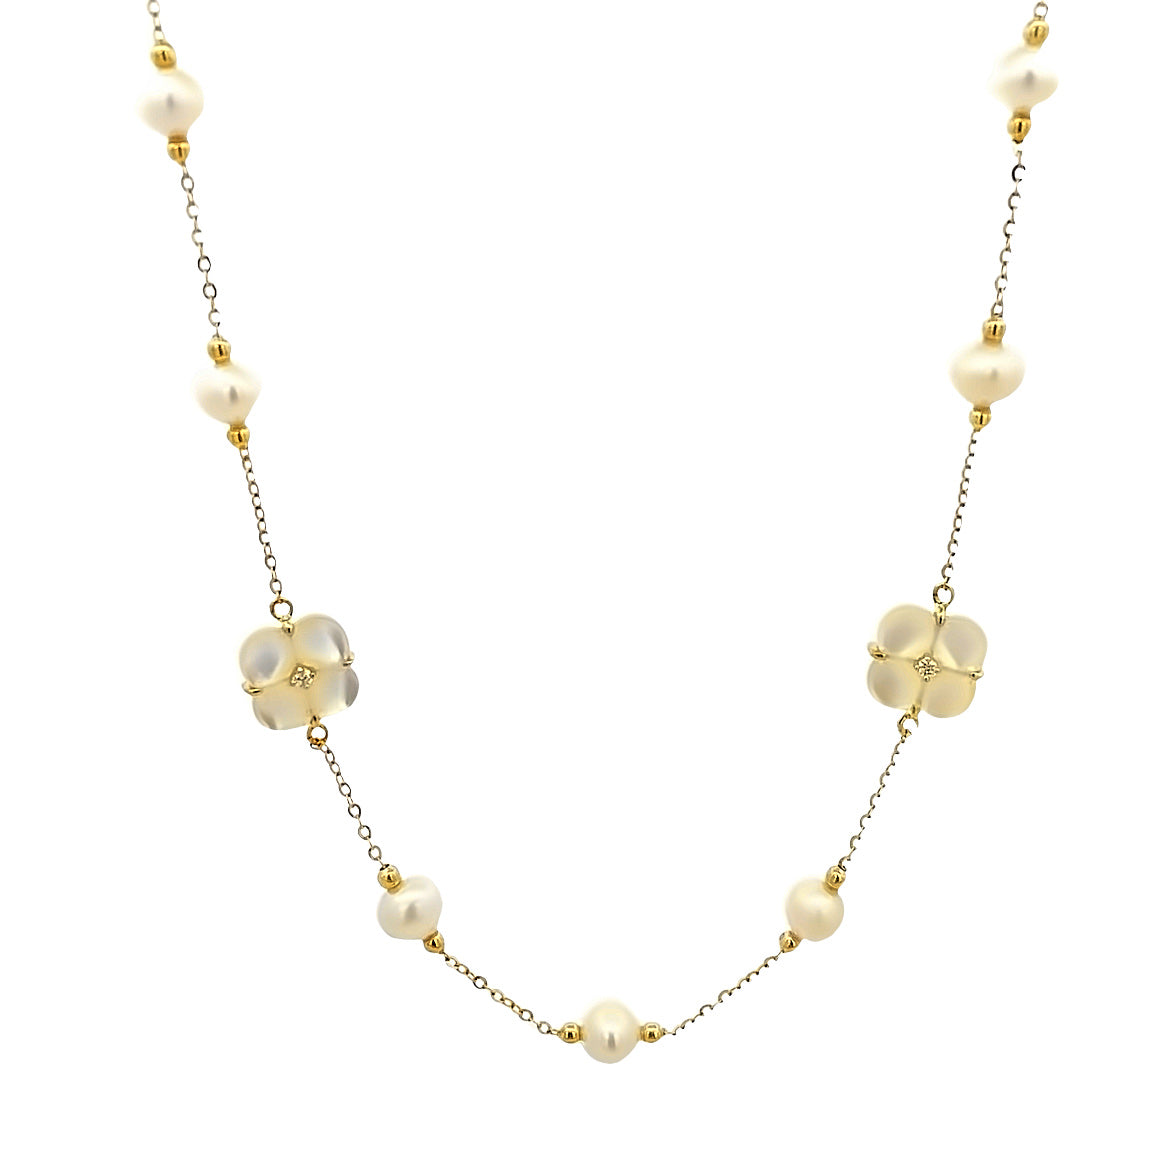 18KY FLOWER SMALL MOTHER OF PEARL FLOWER AND PEARLS NECKLACE